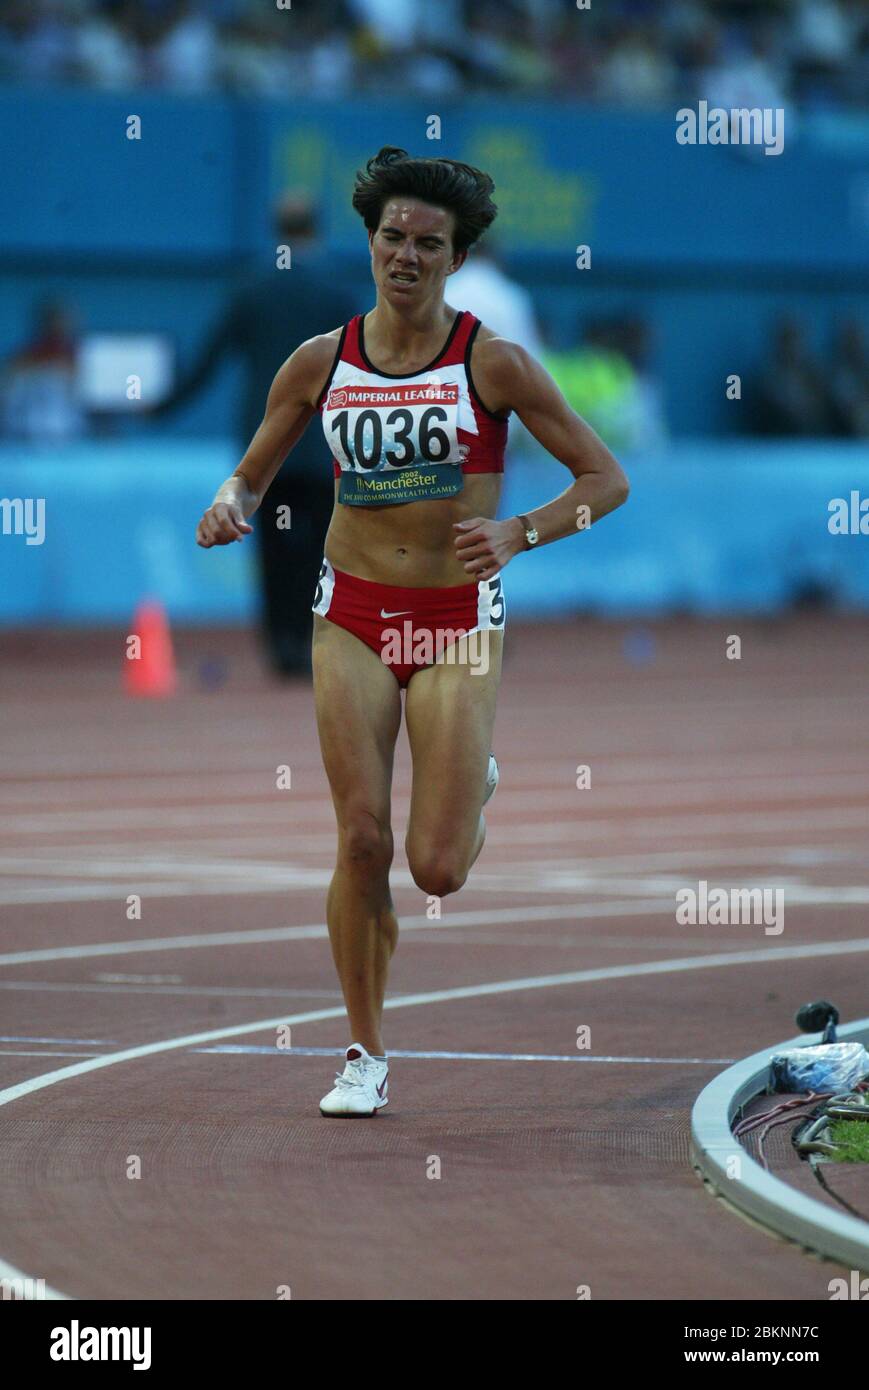 MANCHESTER - JULY 28: Catherine DUGDALE of Wales compete in Women's 5000m Final at City of Manchester Stadium during the 2002 Commonwealth Games, Manc Stock Photo